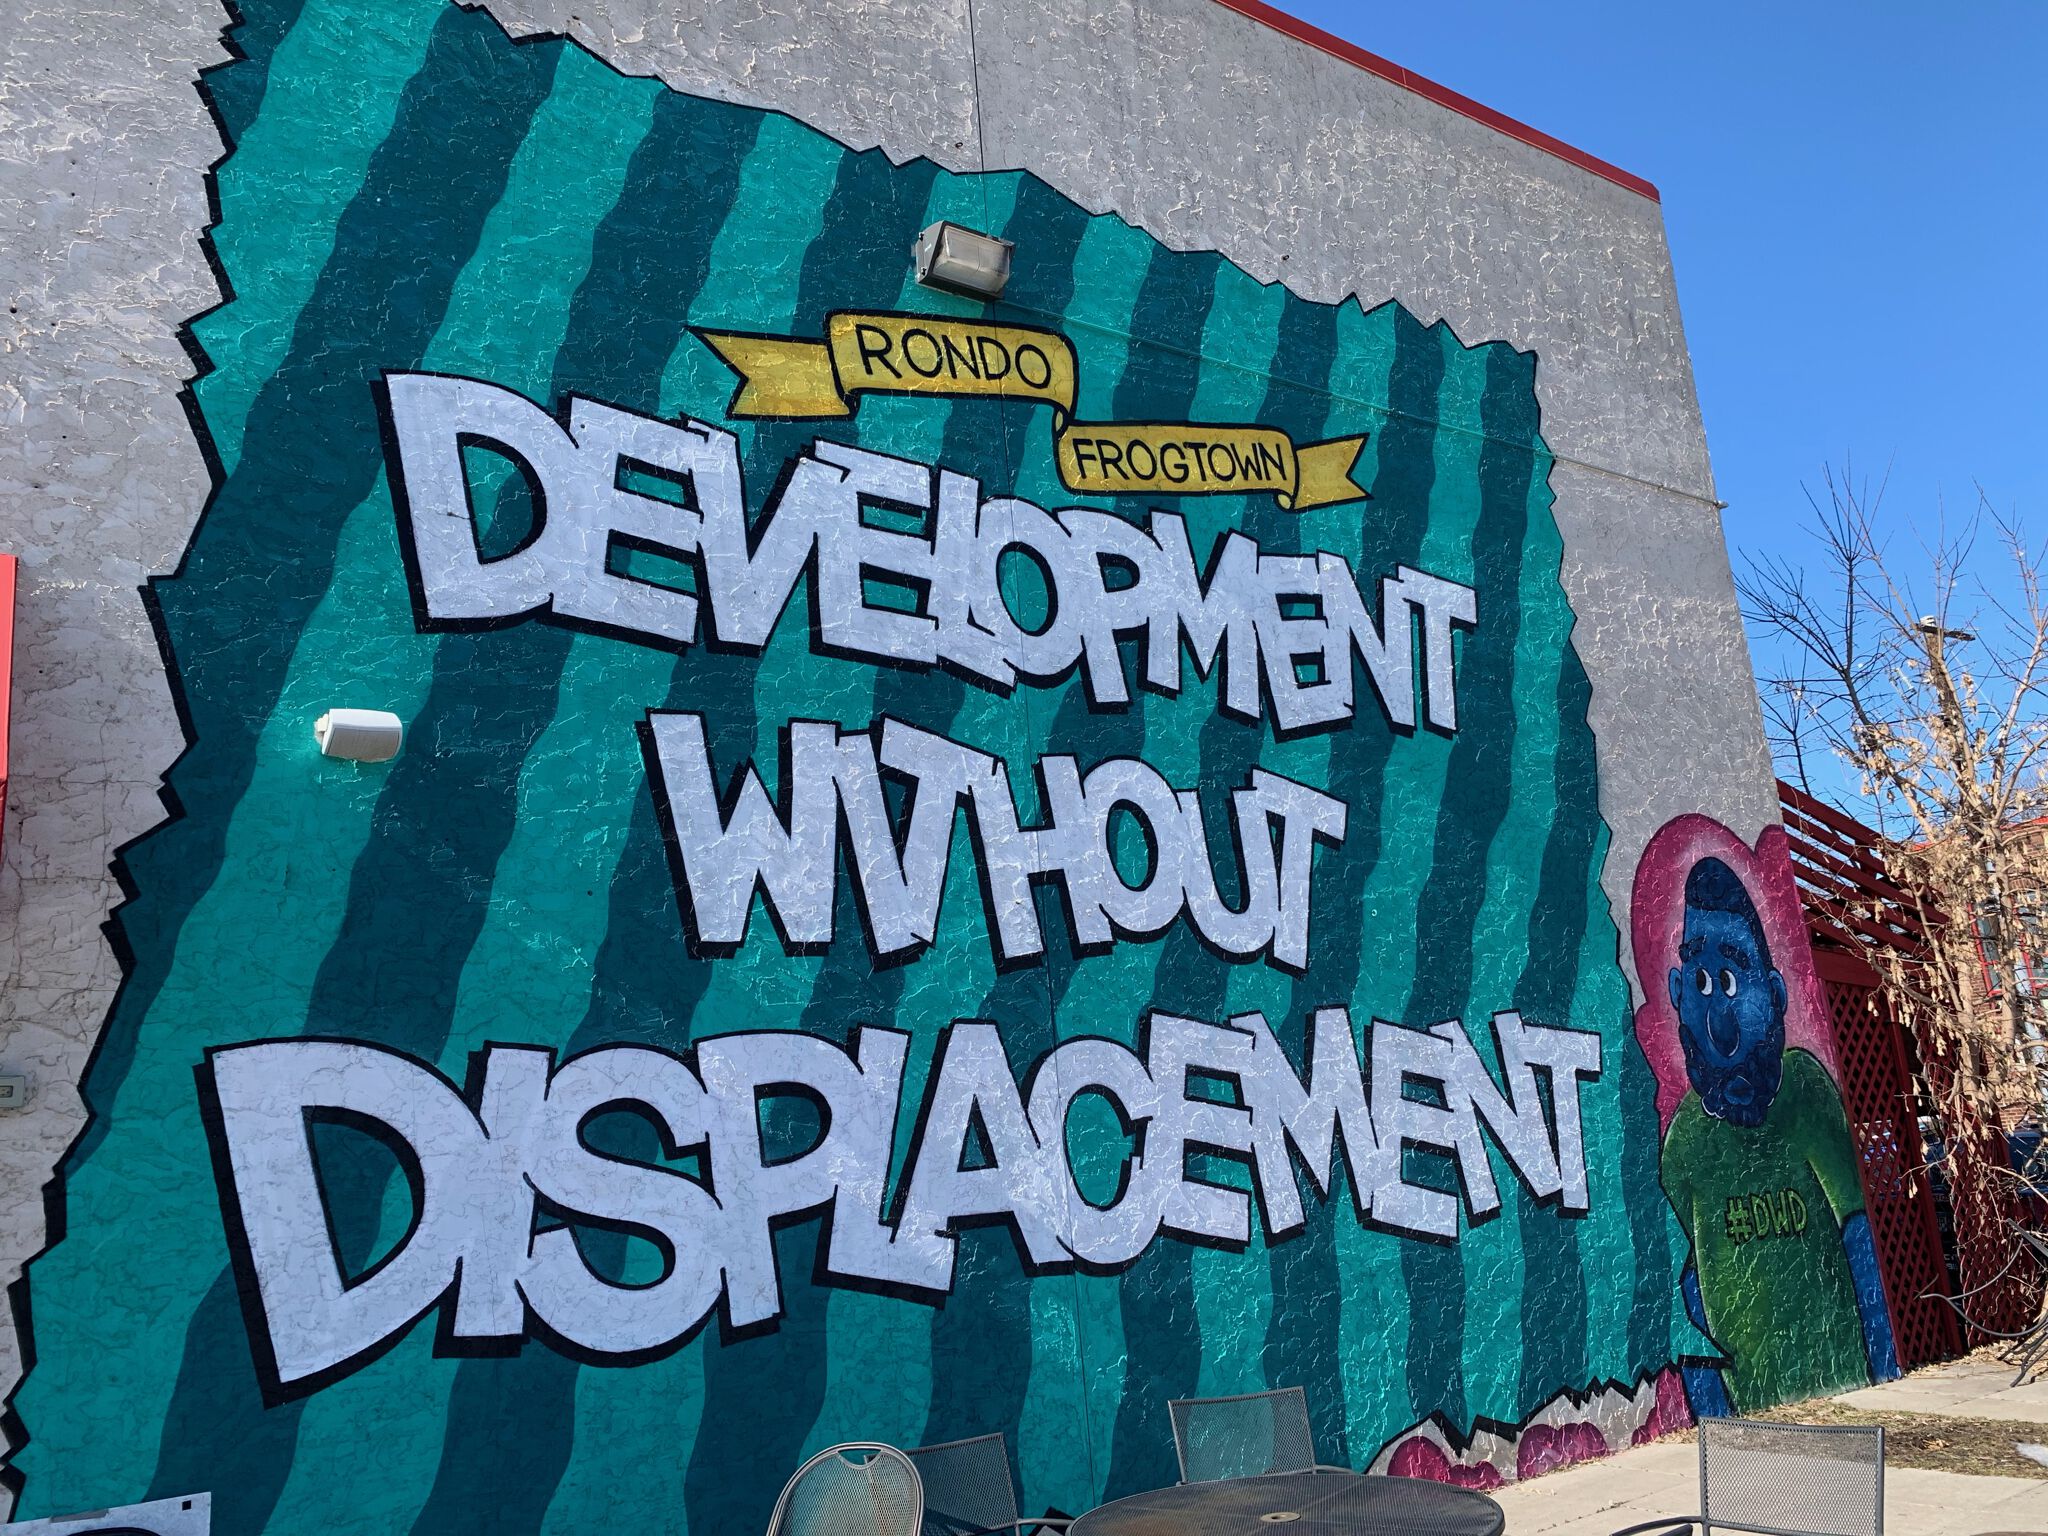 Rondo Frogtown #DWD&mdash;Development without Displacement 